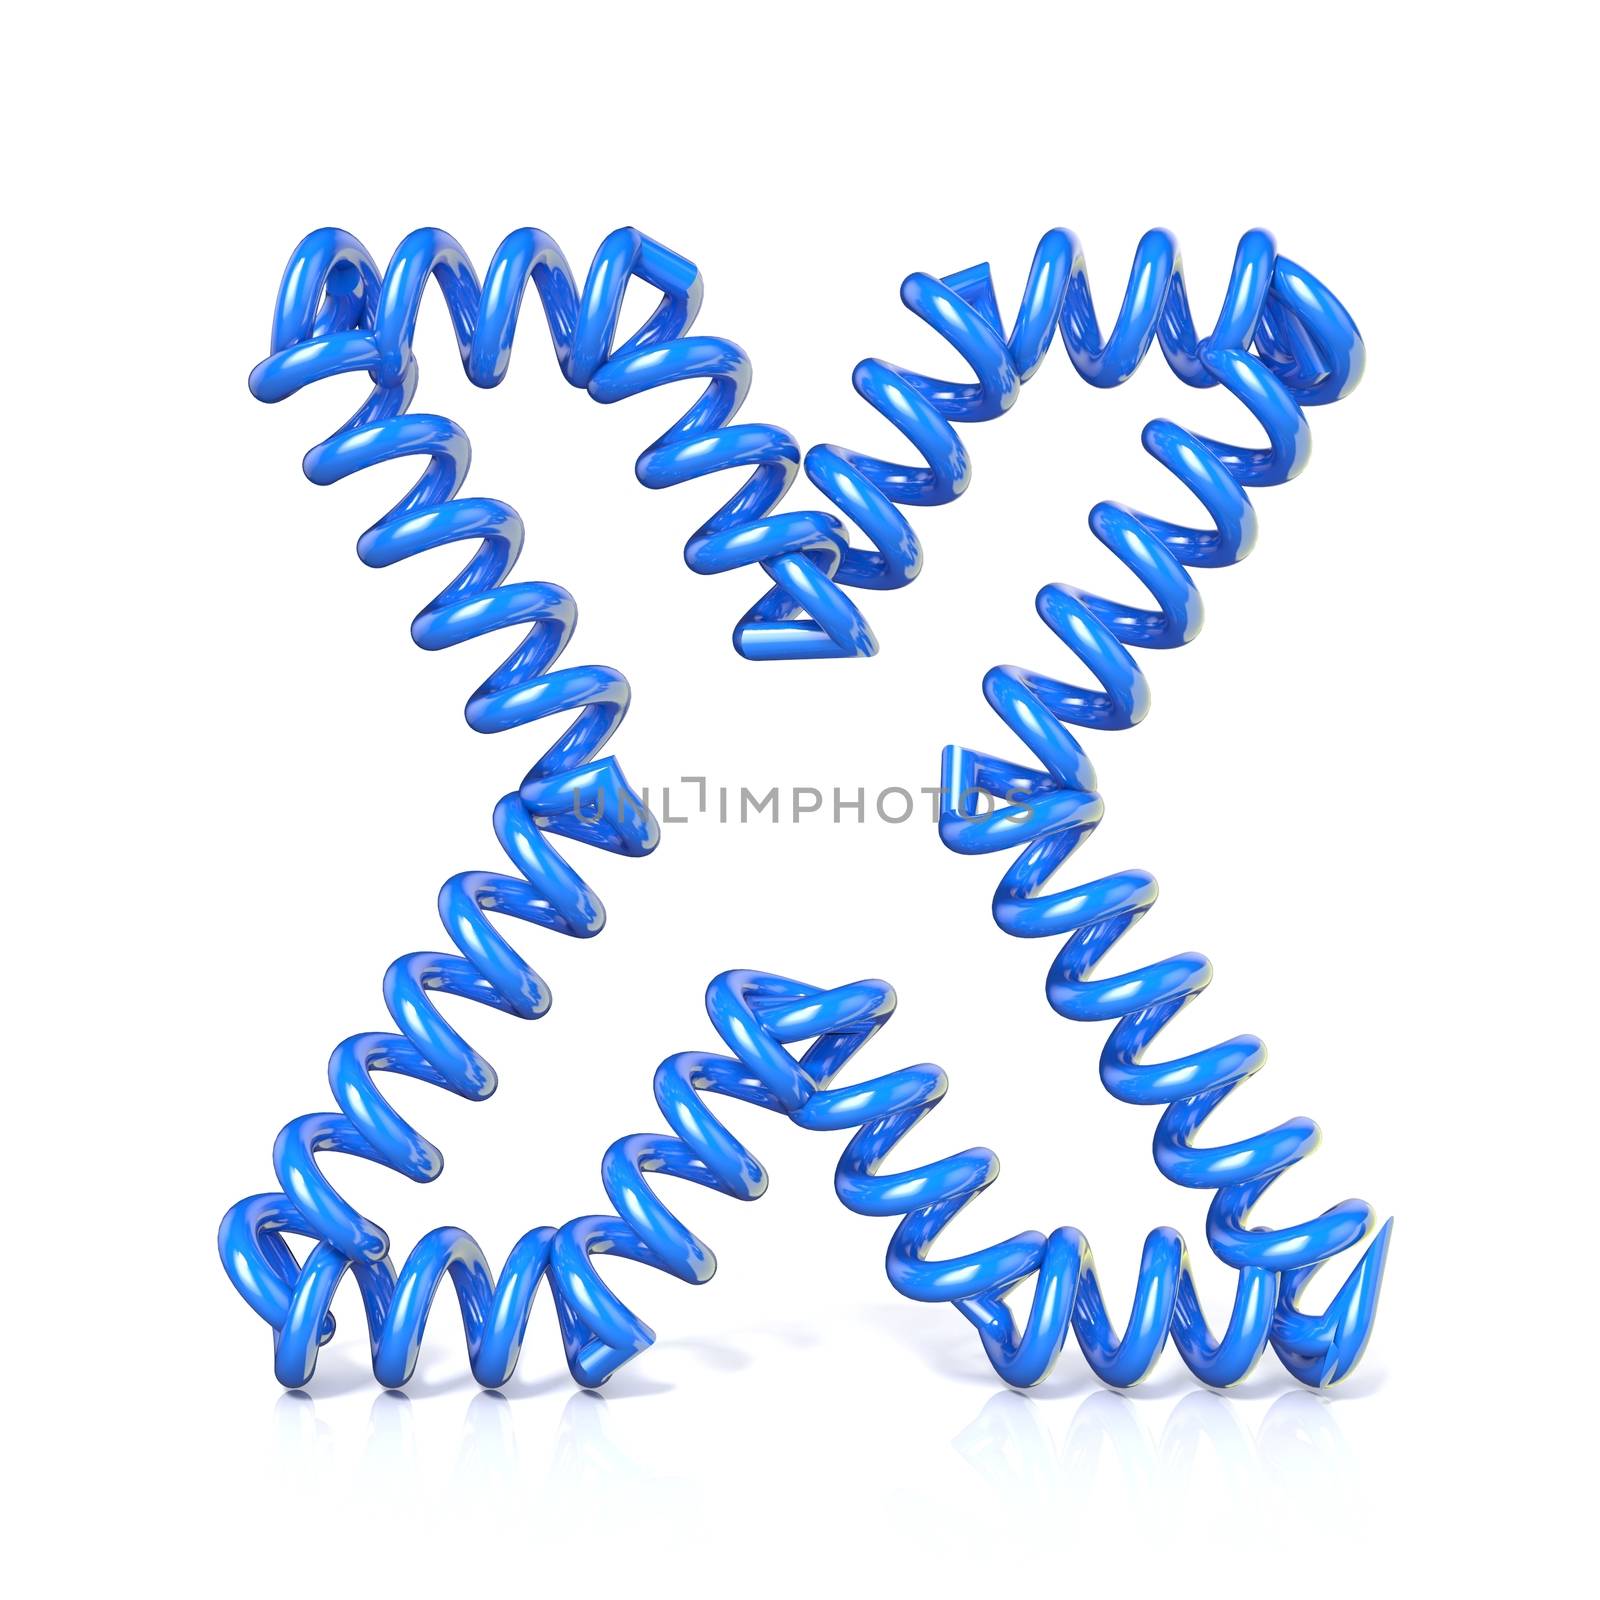 Spring, spiral cable font collection letter - X. 3D render illustration, isolated on white background